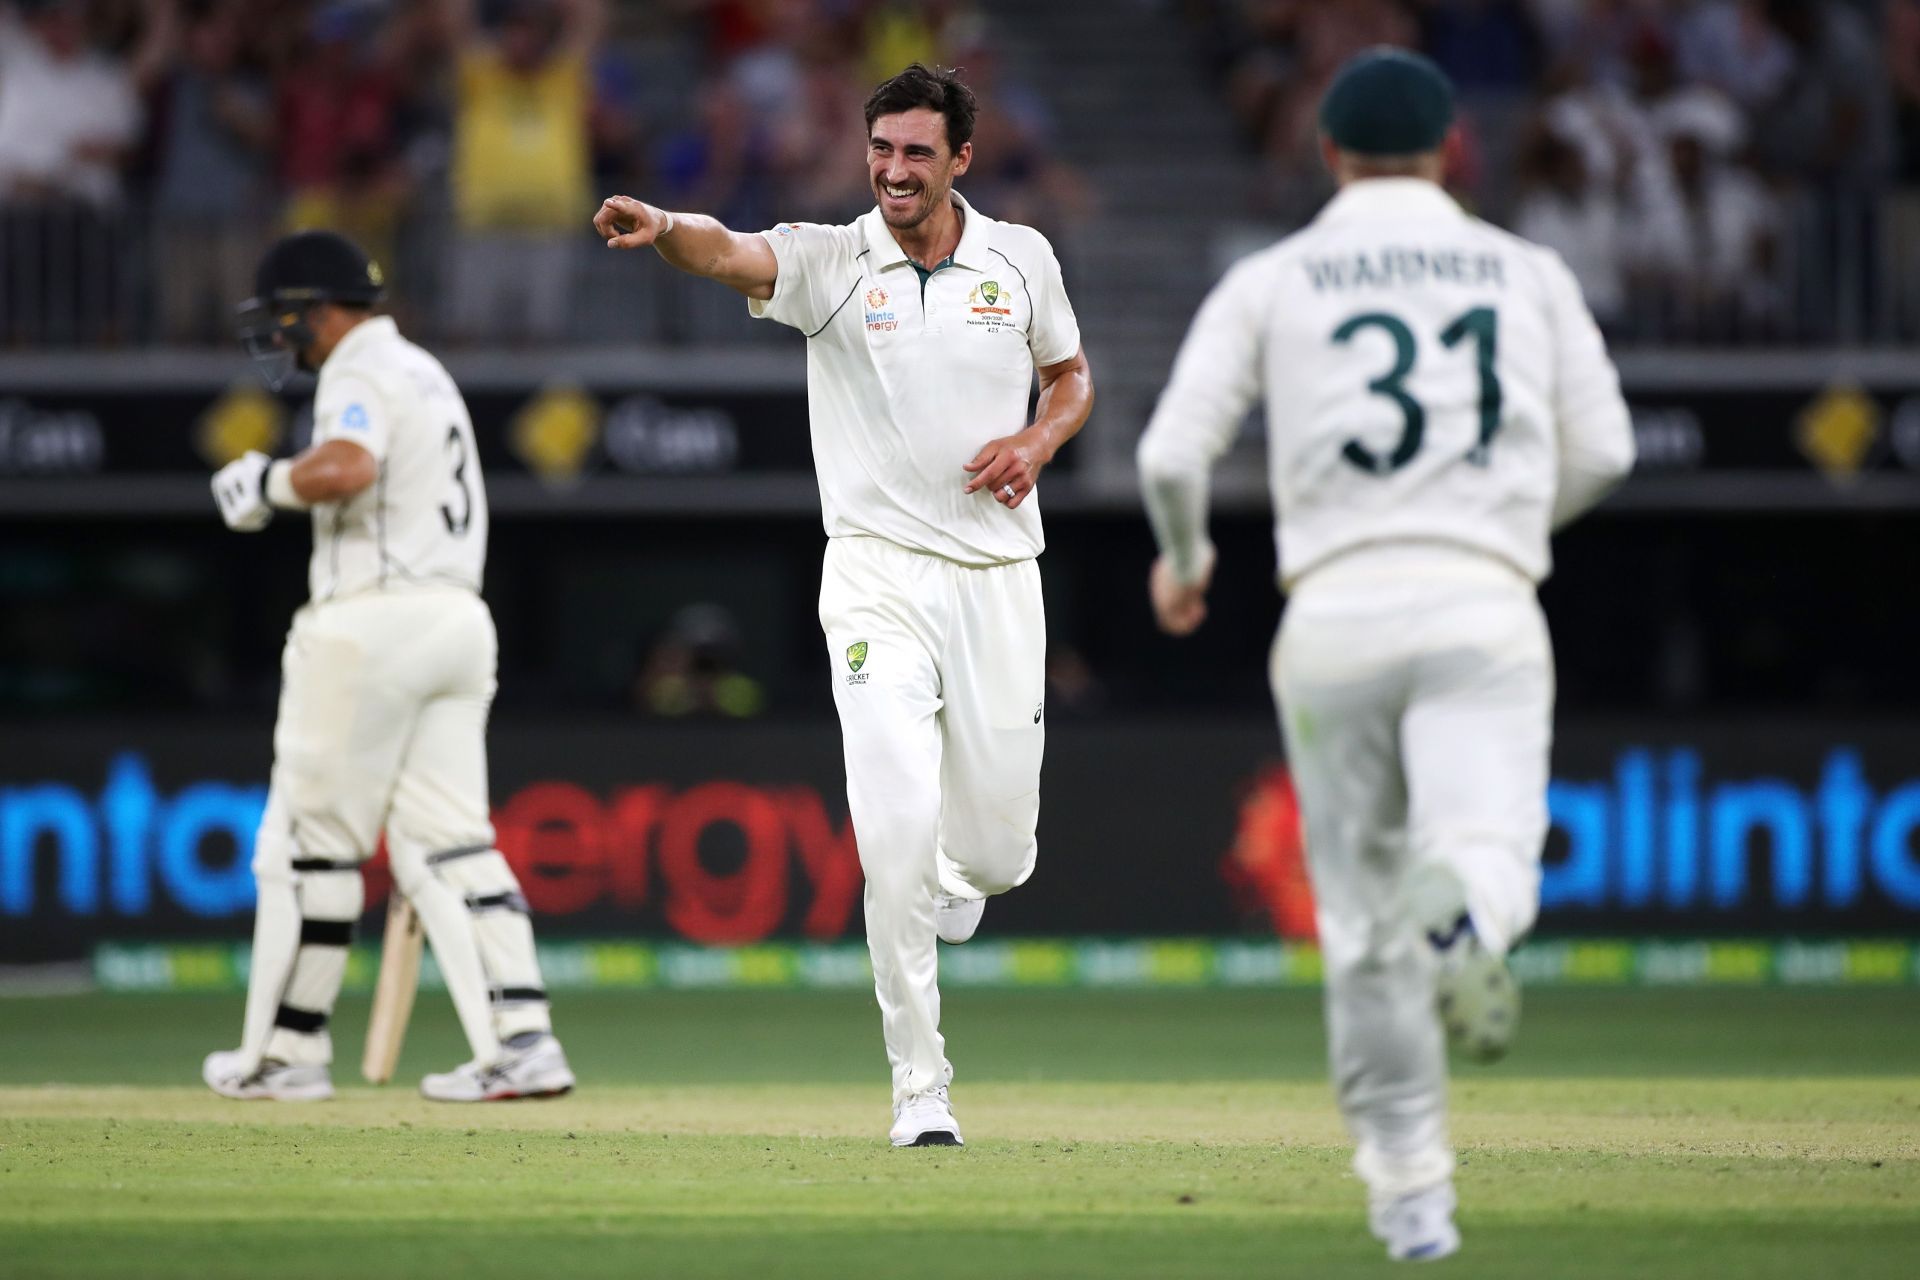 Can Starc produce some magic at the Gabba?